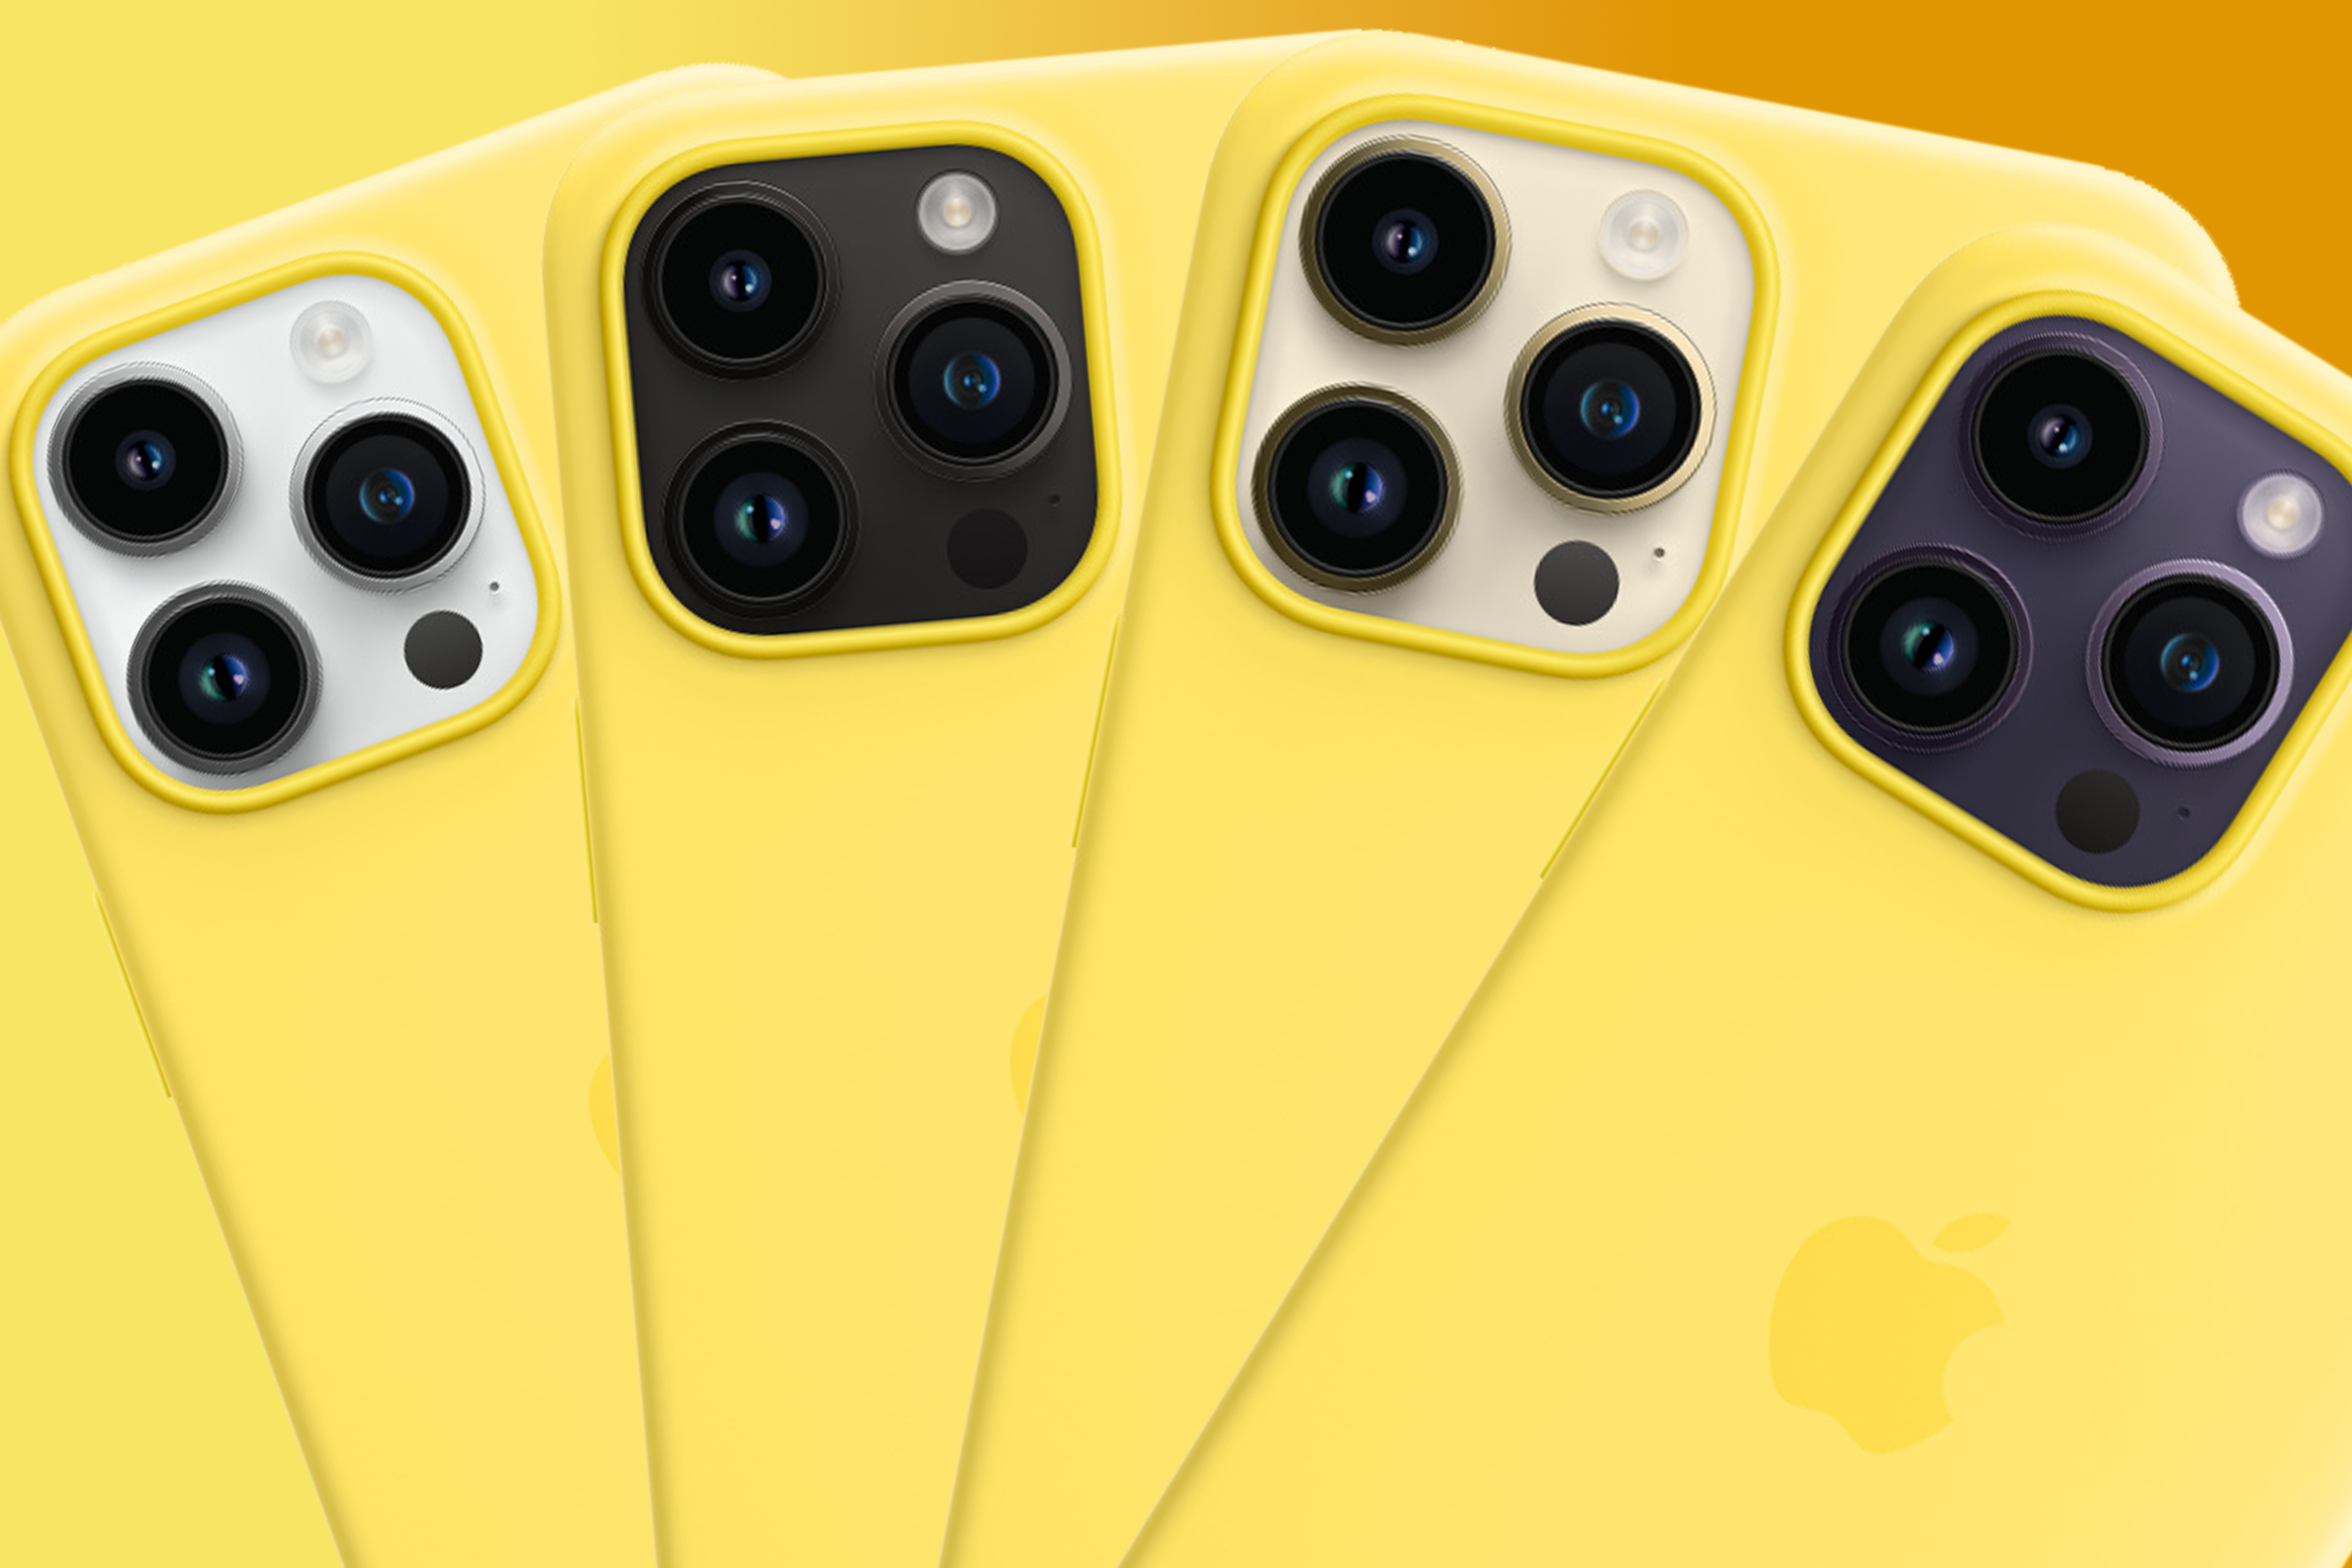 If you want a yellow iPhone 14 Pro, Appleâs got you covered